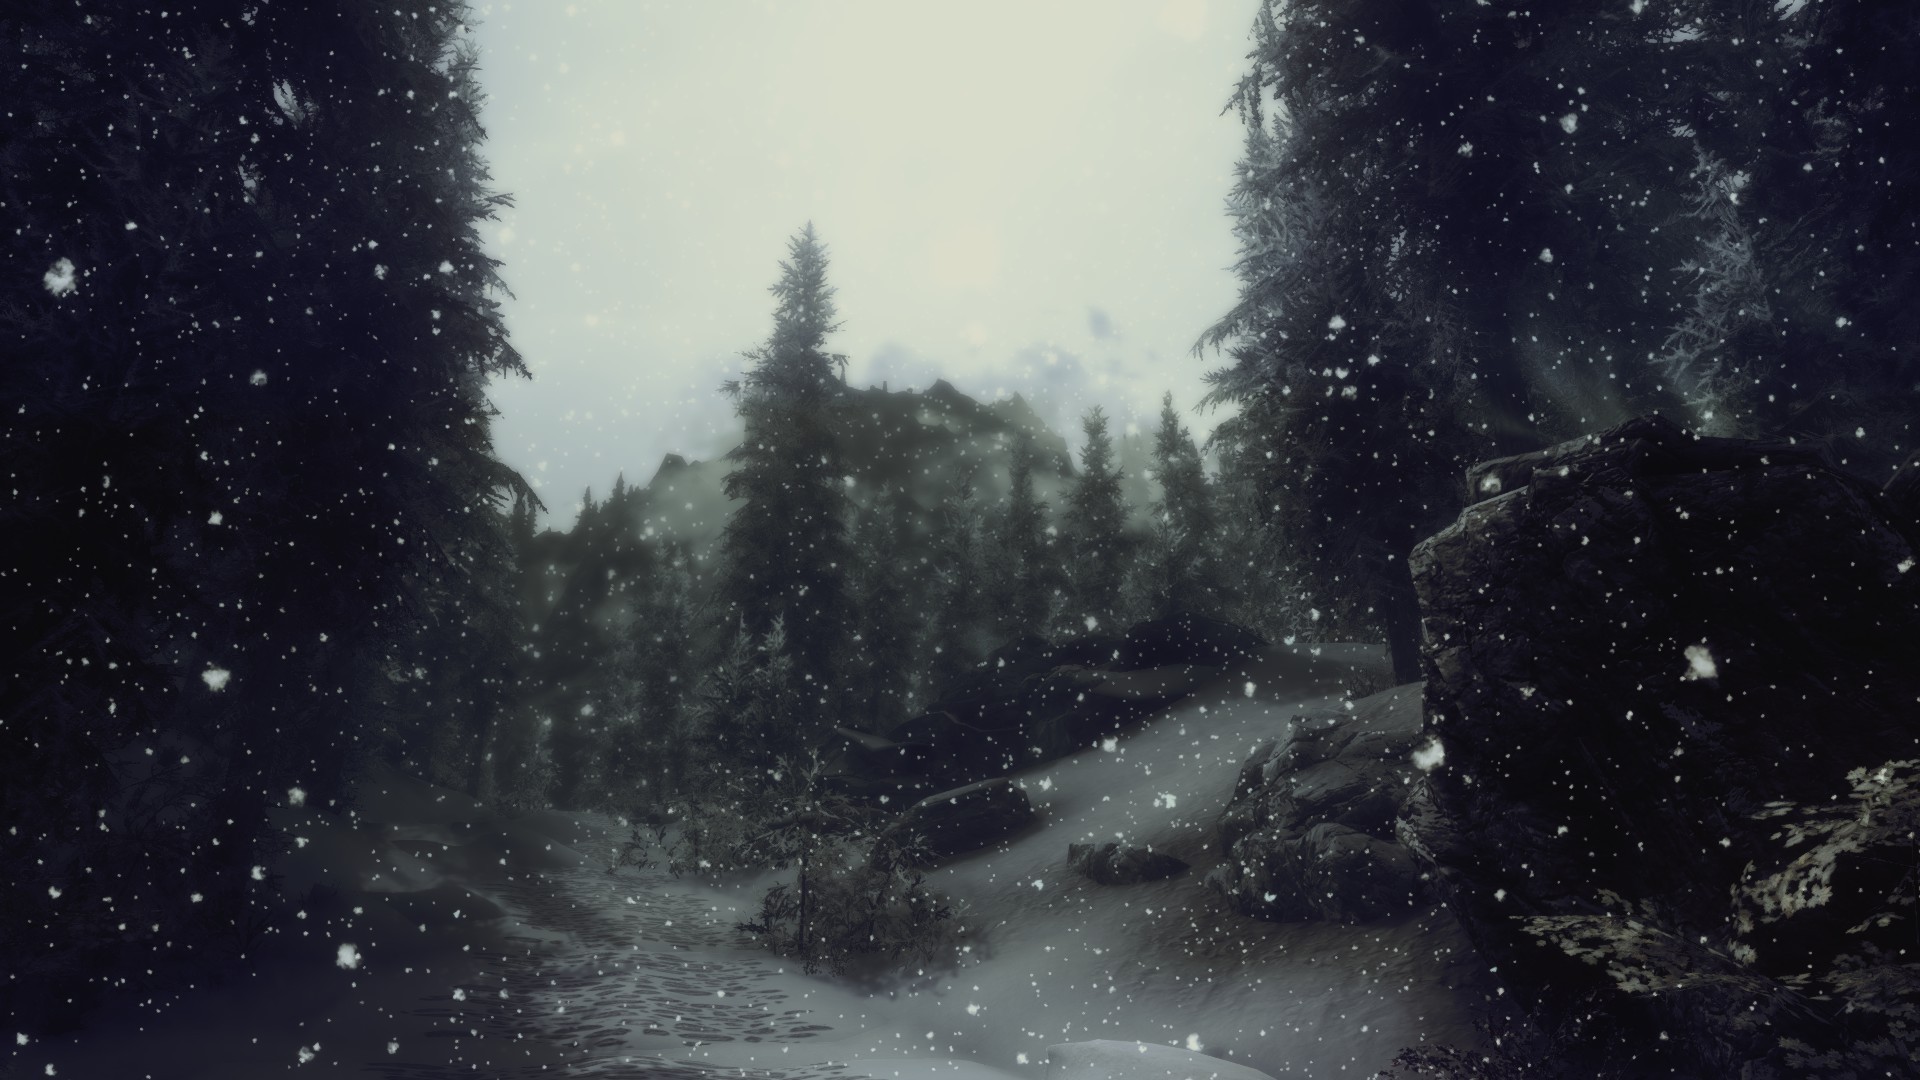 Artwork Nature Snow Trees The Elder Scrolls V Skyrim Video Games Sky Forest Clearing Forest Road Win 1920x1080